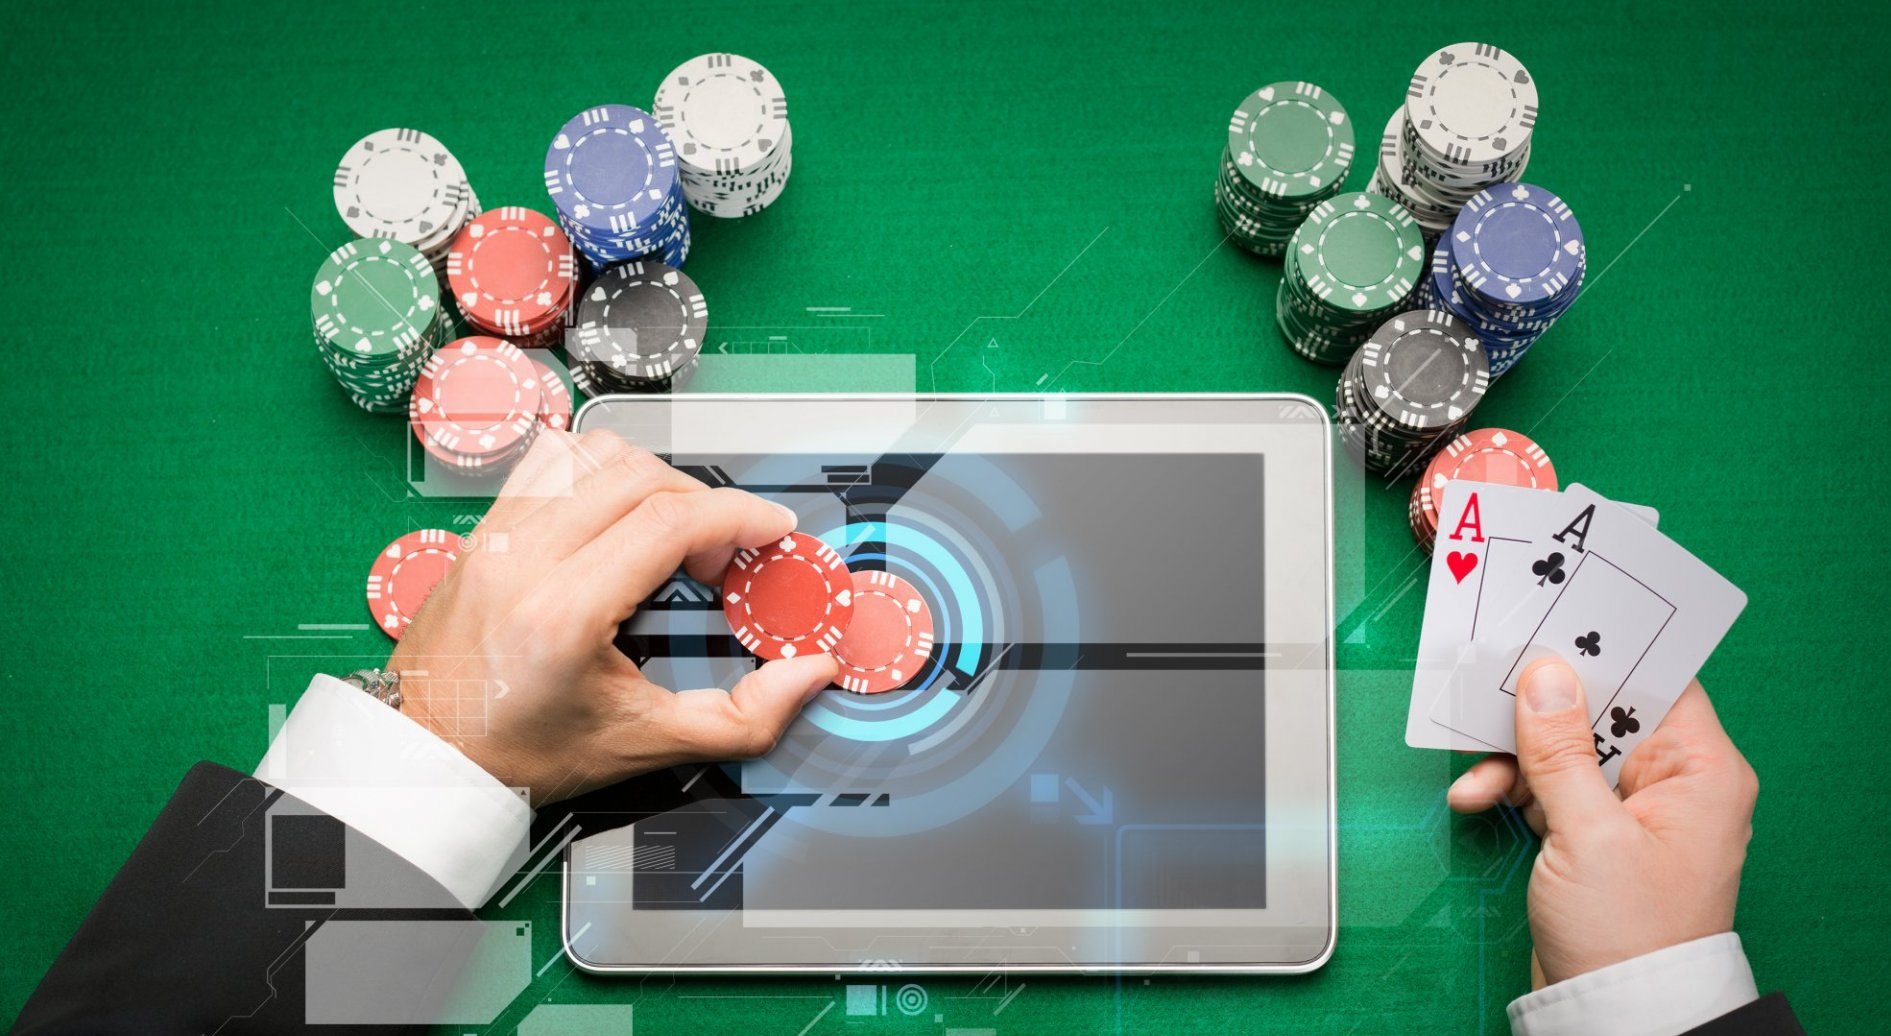 Bets.io Online Casino-live blackjack, roulette, baccarat, and poker